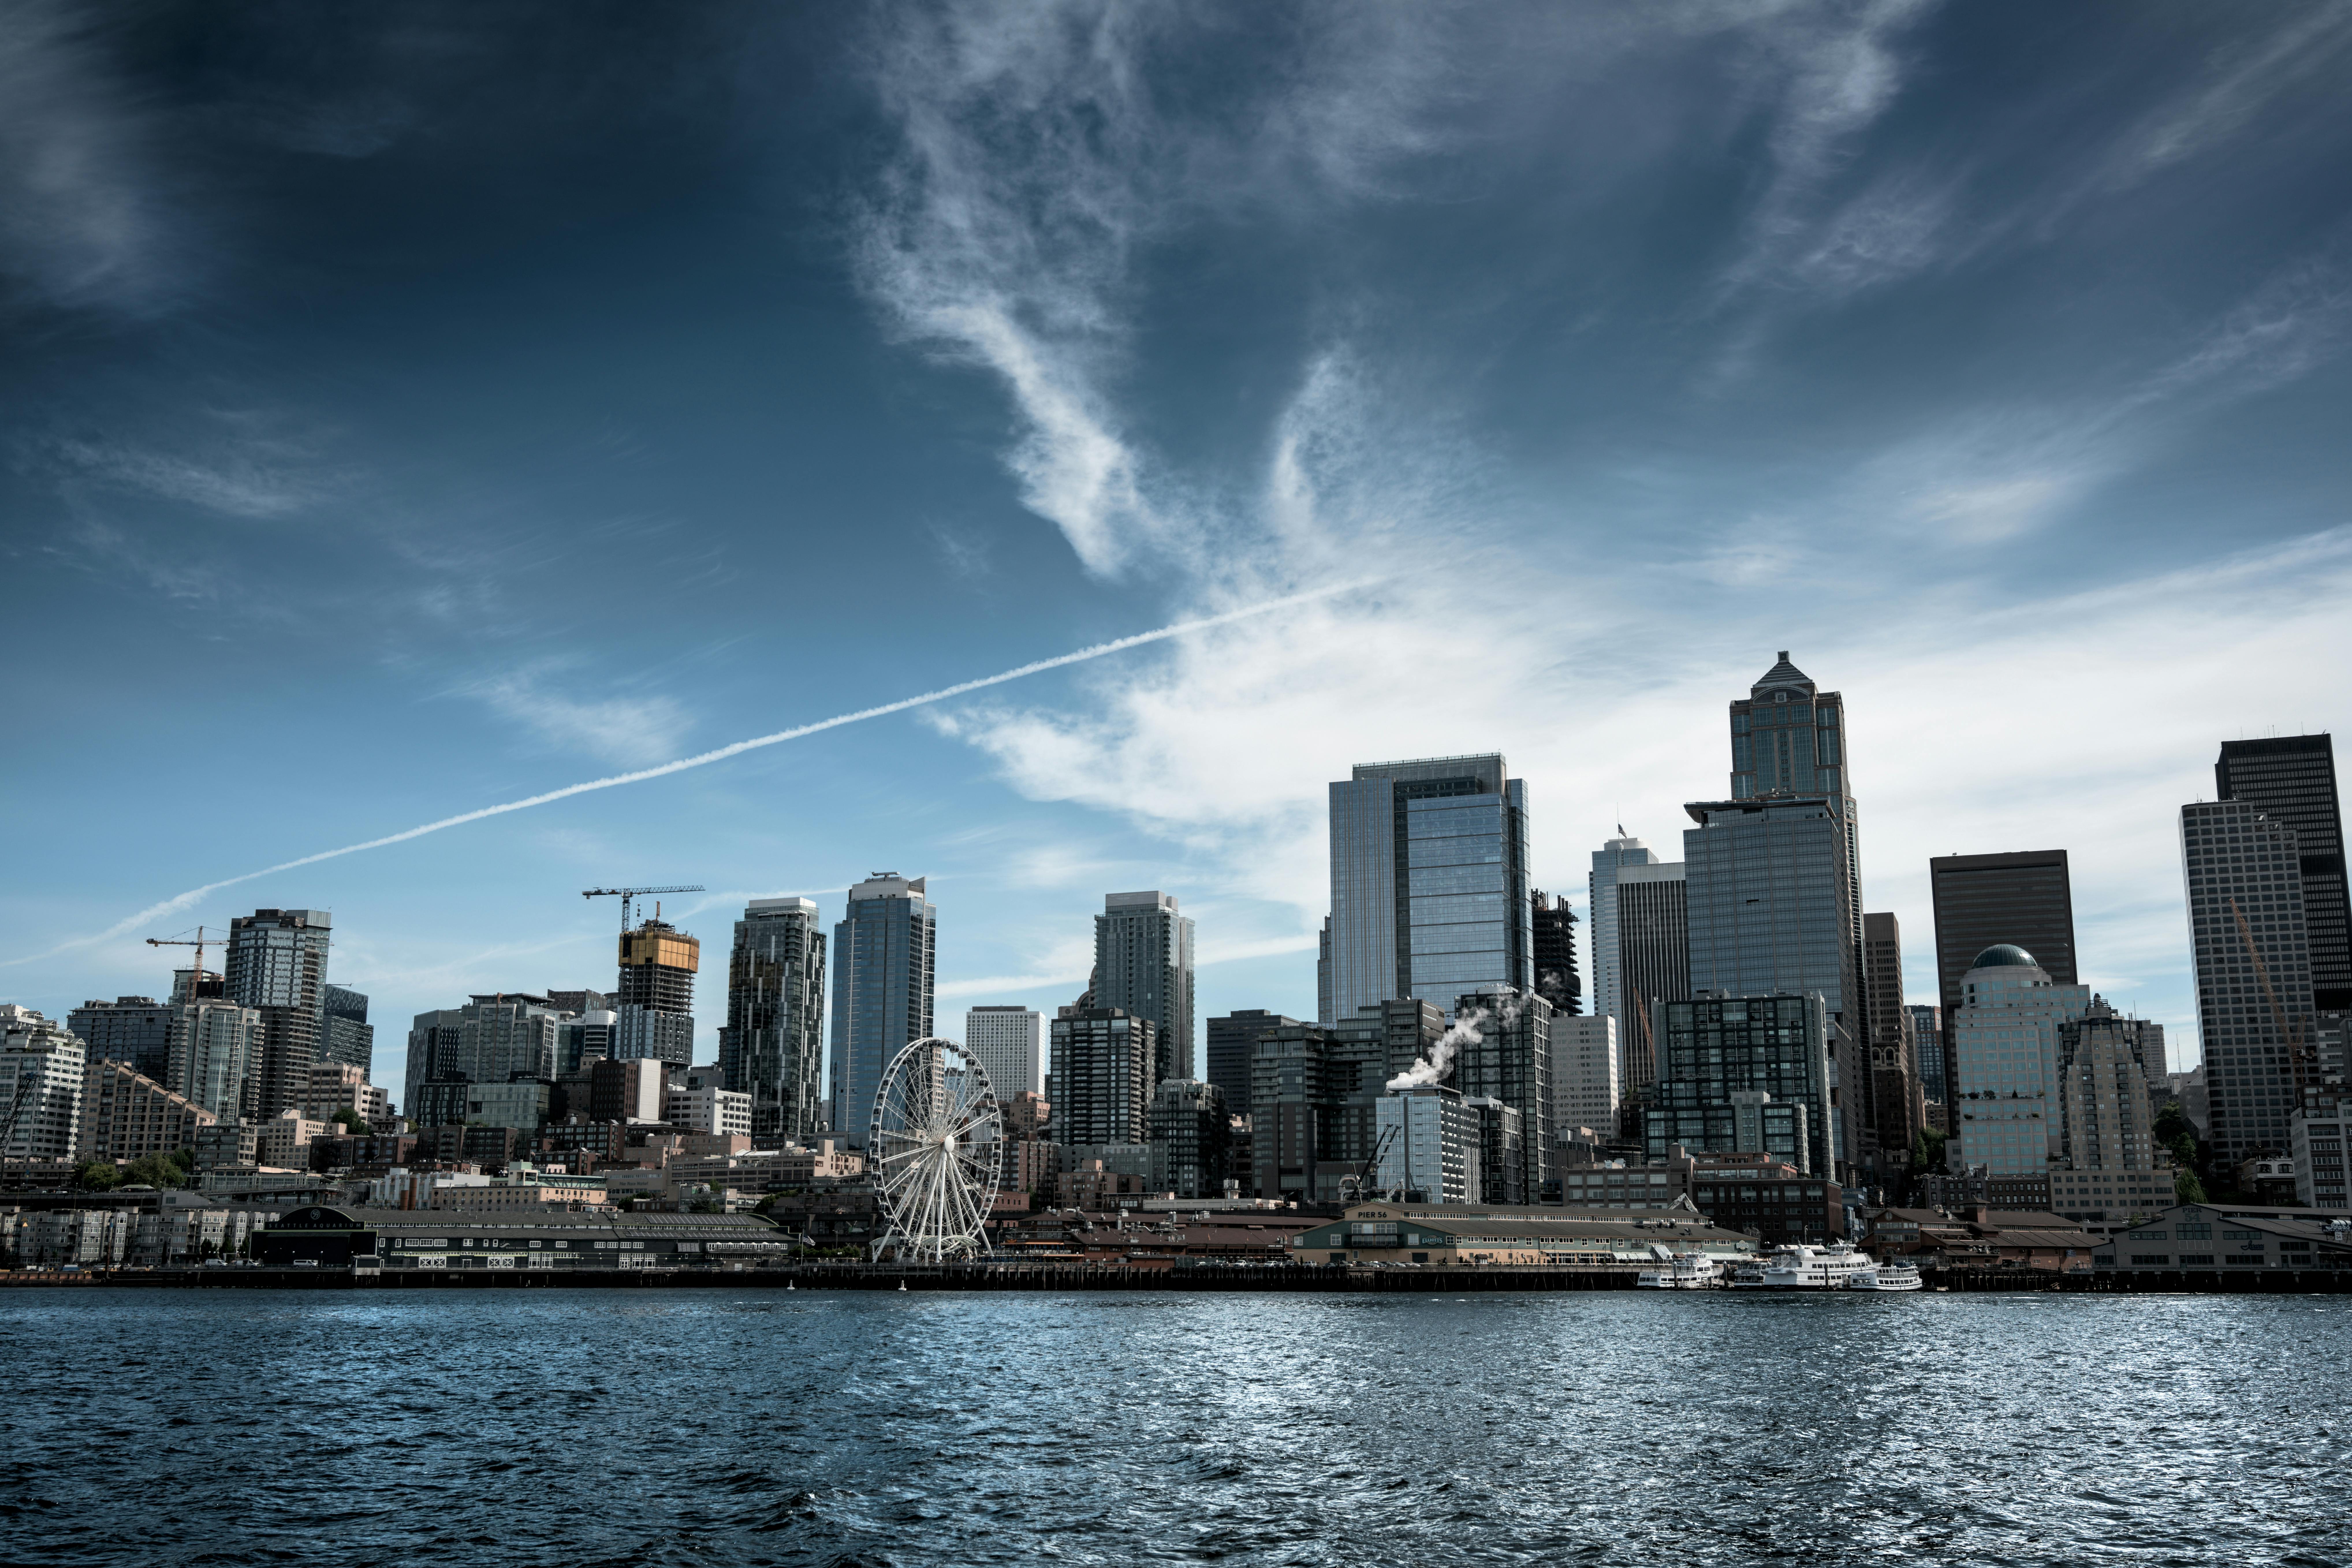 500 Stunning Seattle Pictures  Download Free Images on Unsplash